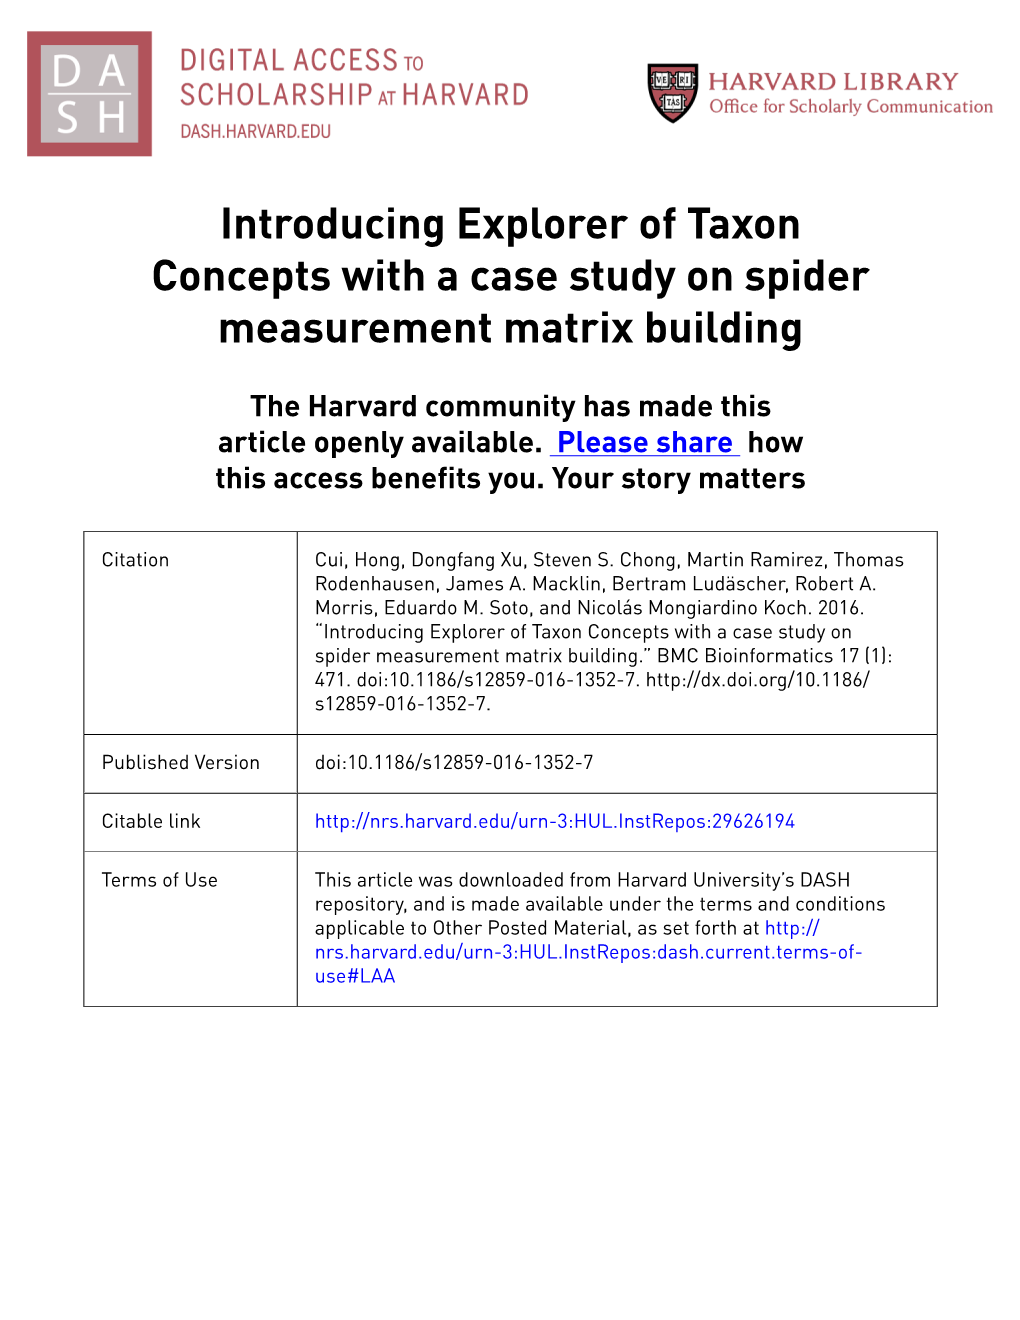 Introducing Explorer of Taxon Concepts with a Case Study on Spider Measurement Matrix Building